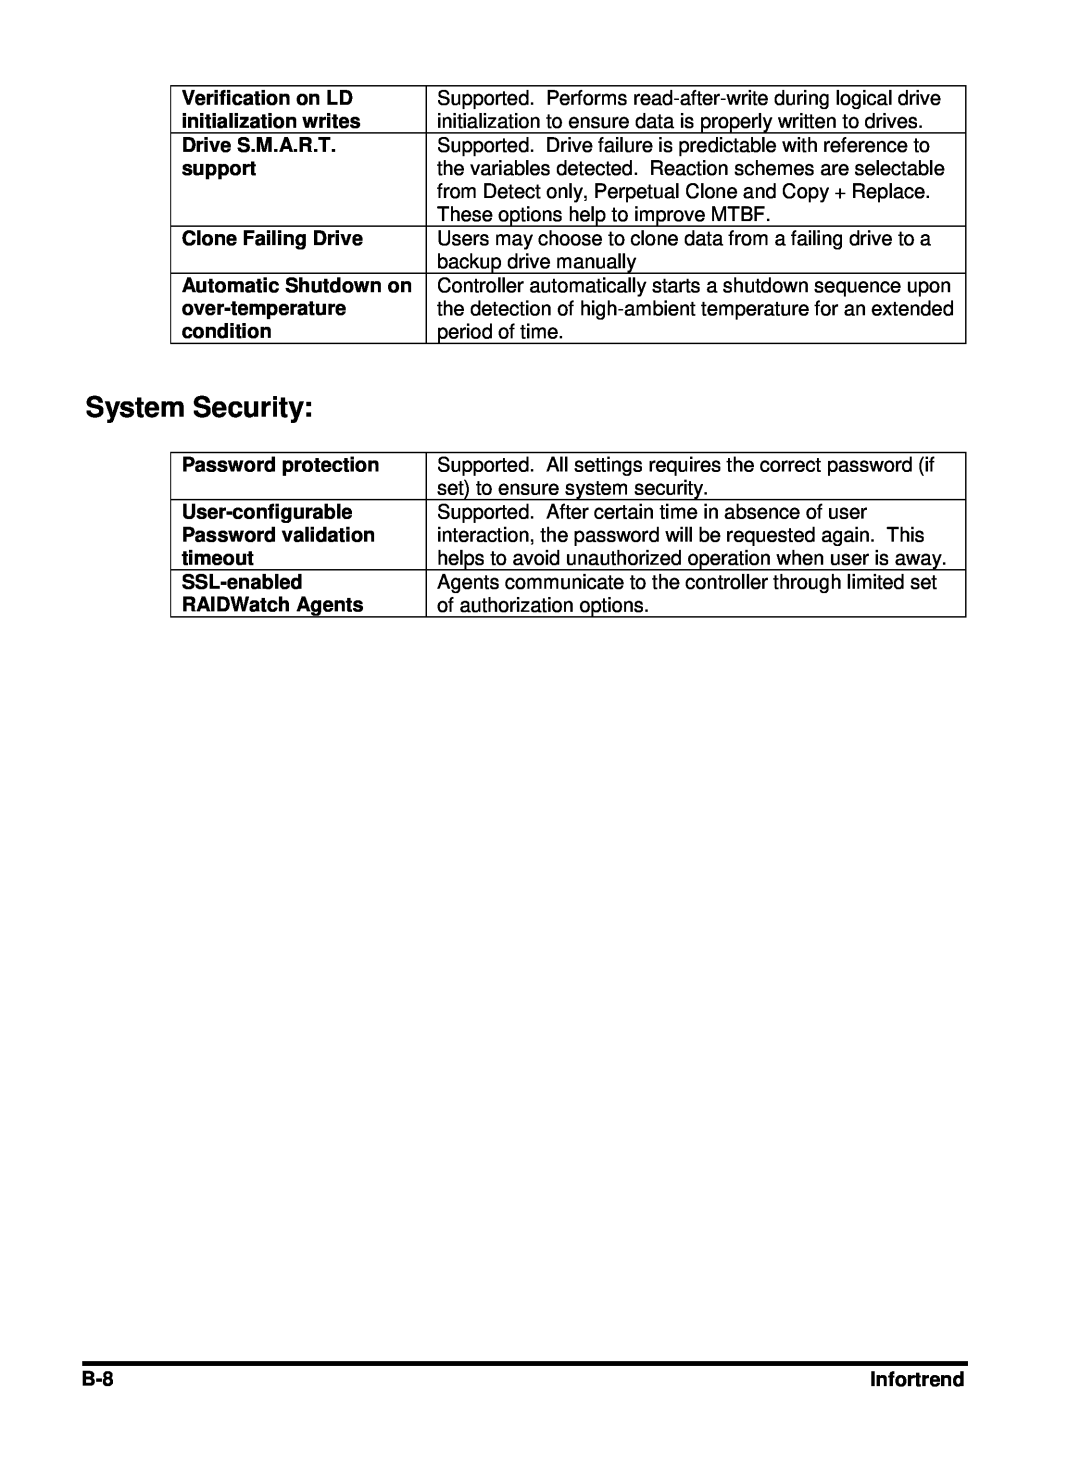 Compaq Infortrend manual System Security 